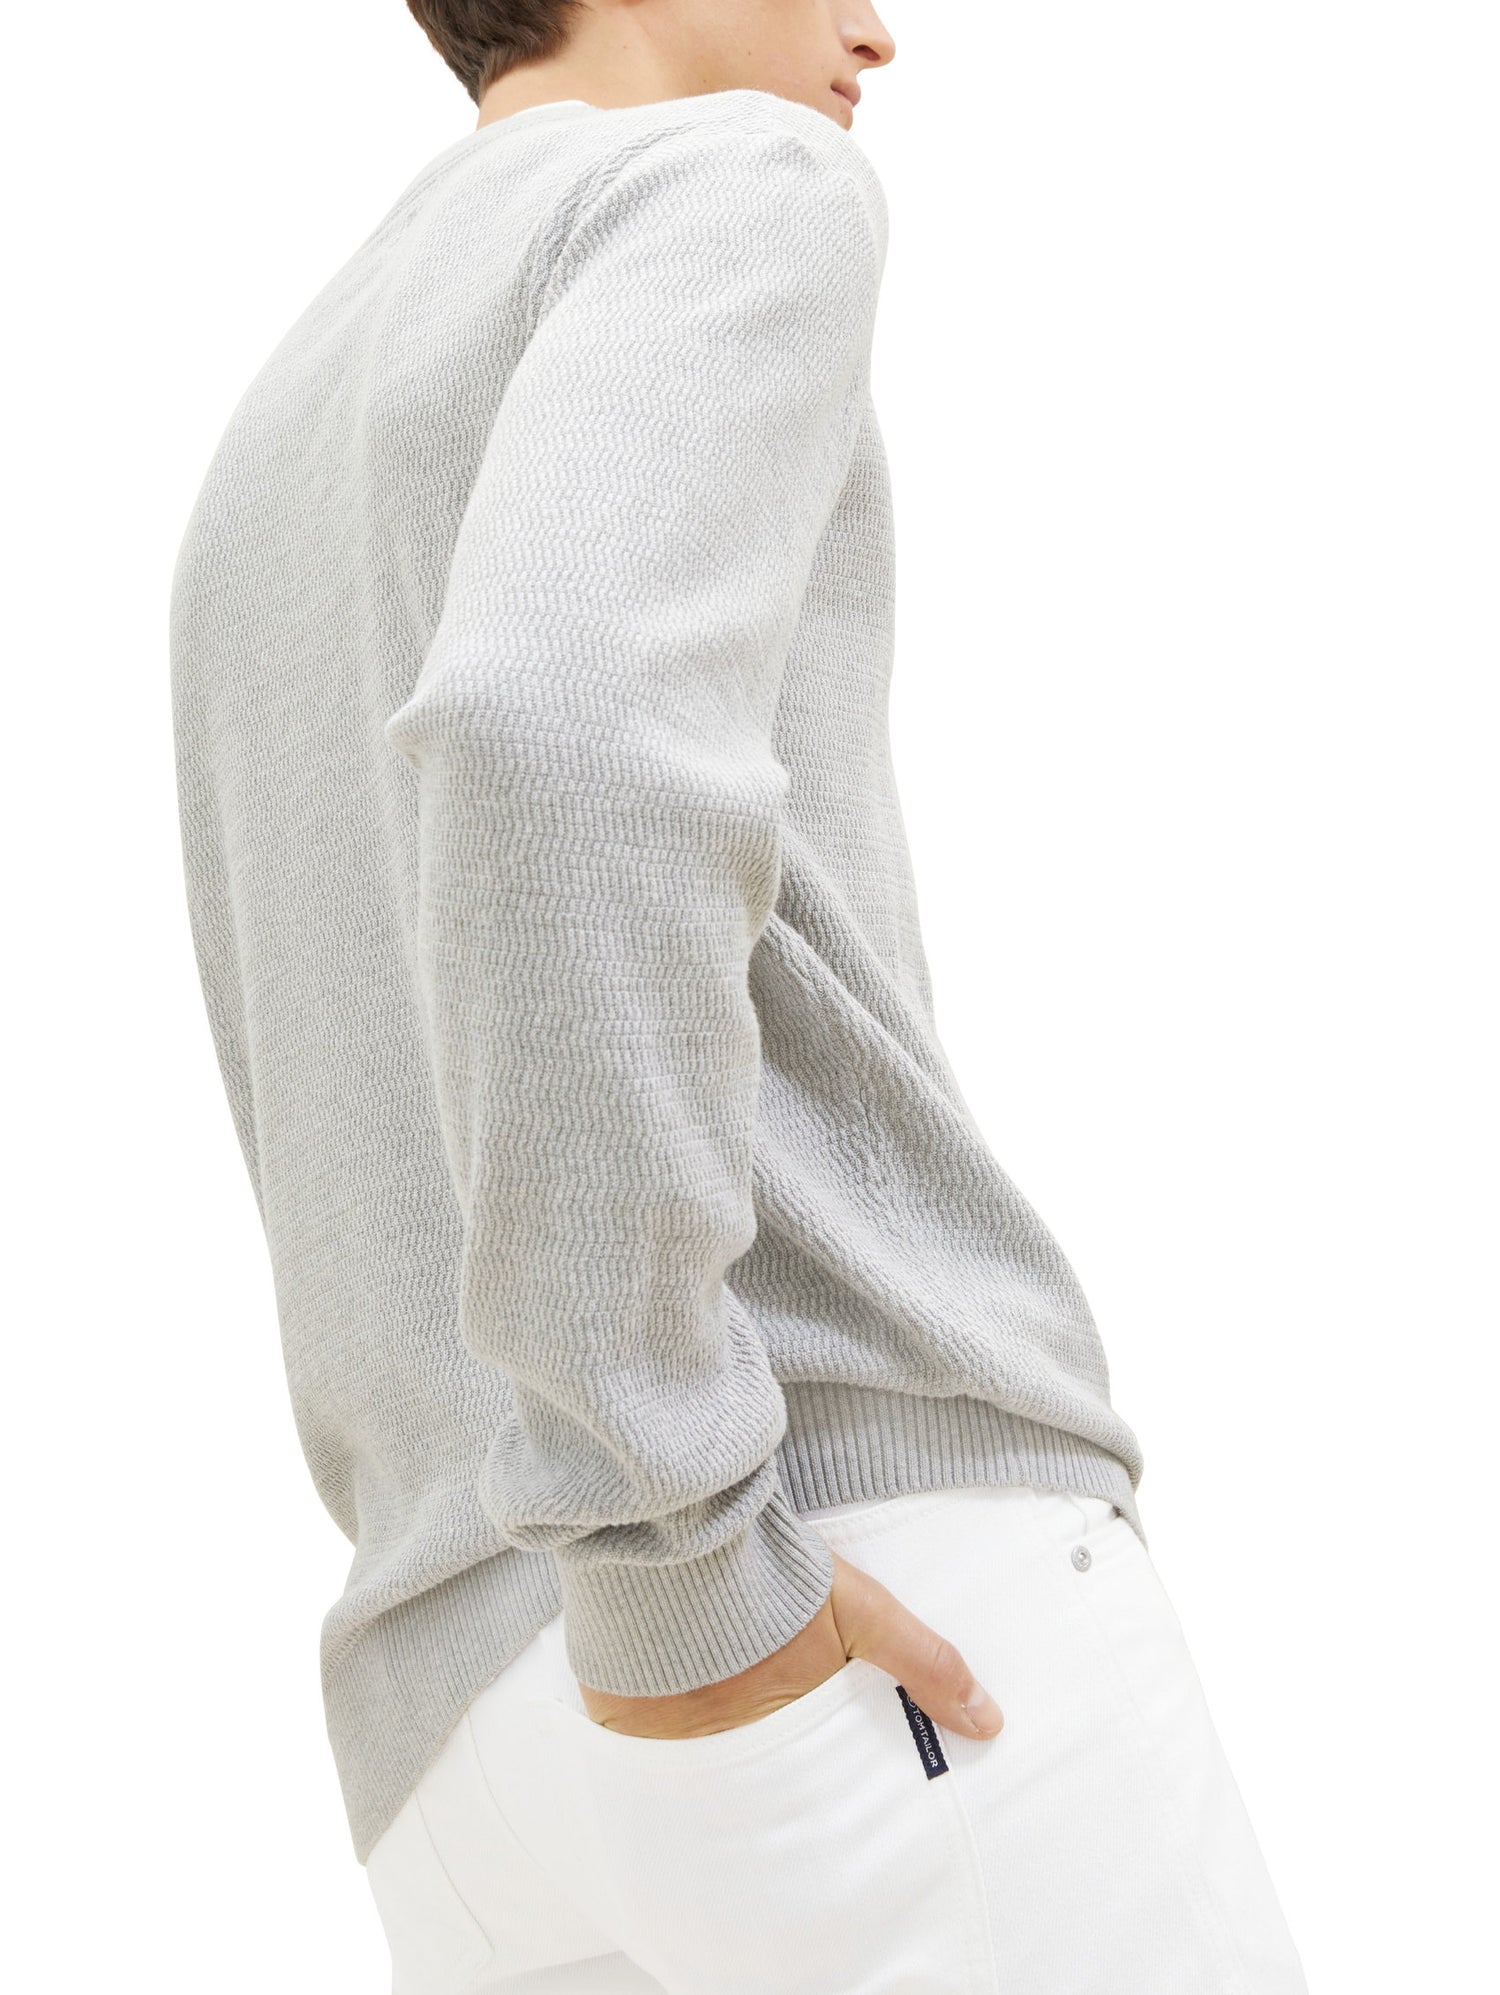 Structured Doublelayer Knit Pullover_1038674_15398_06